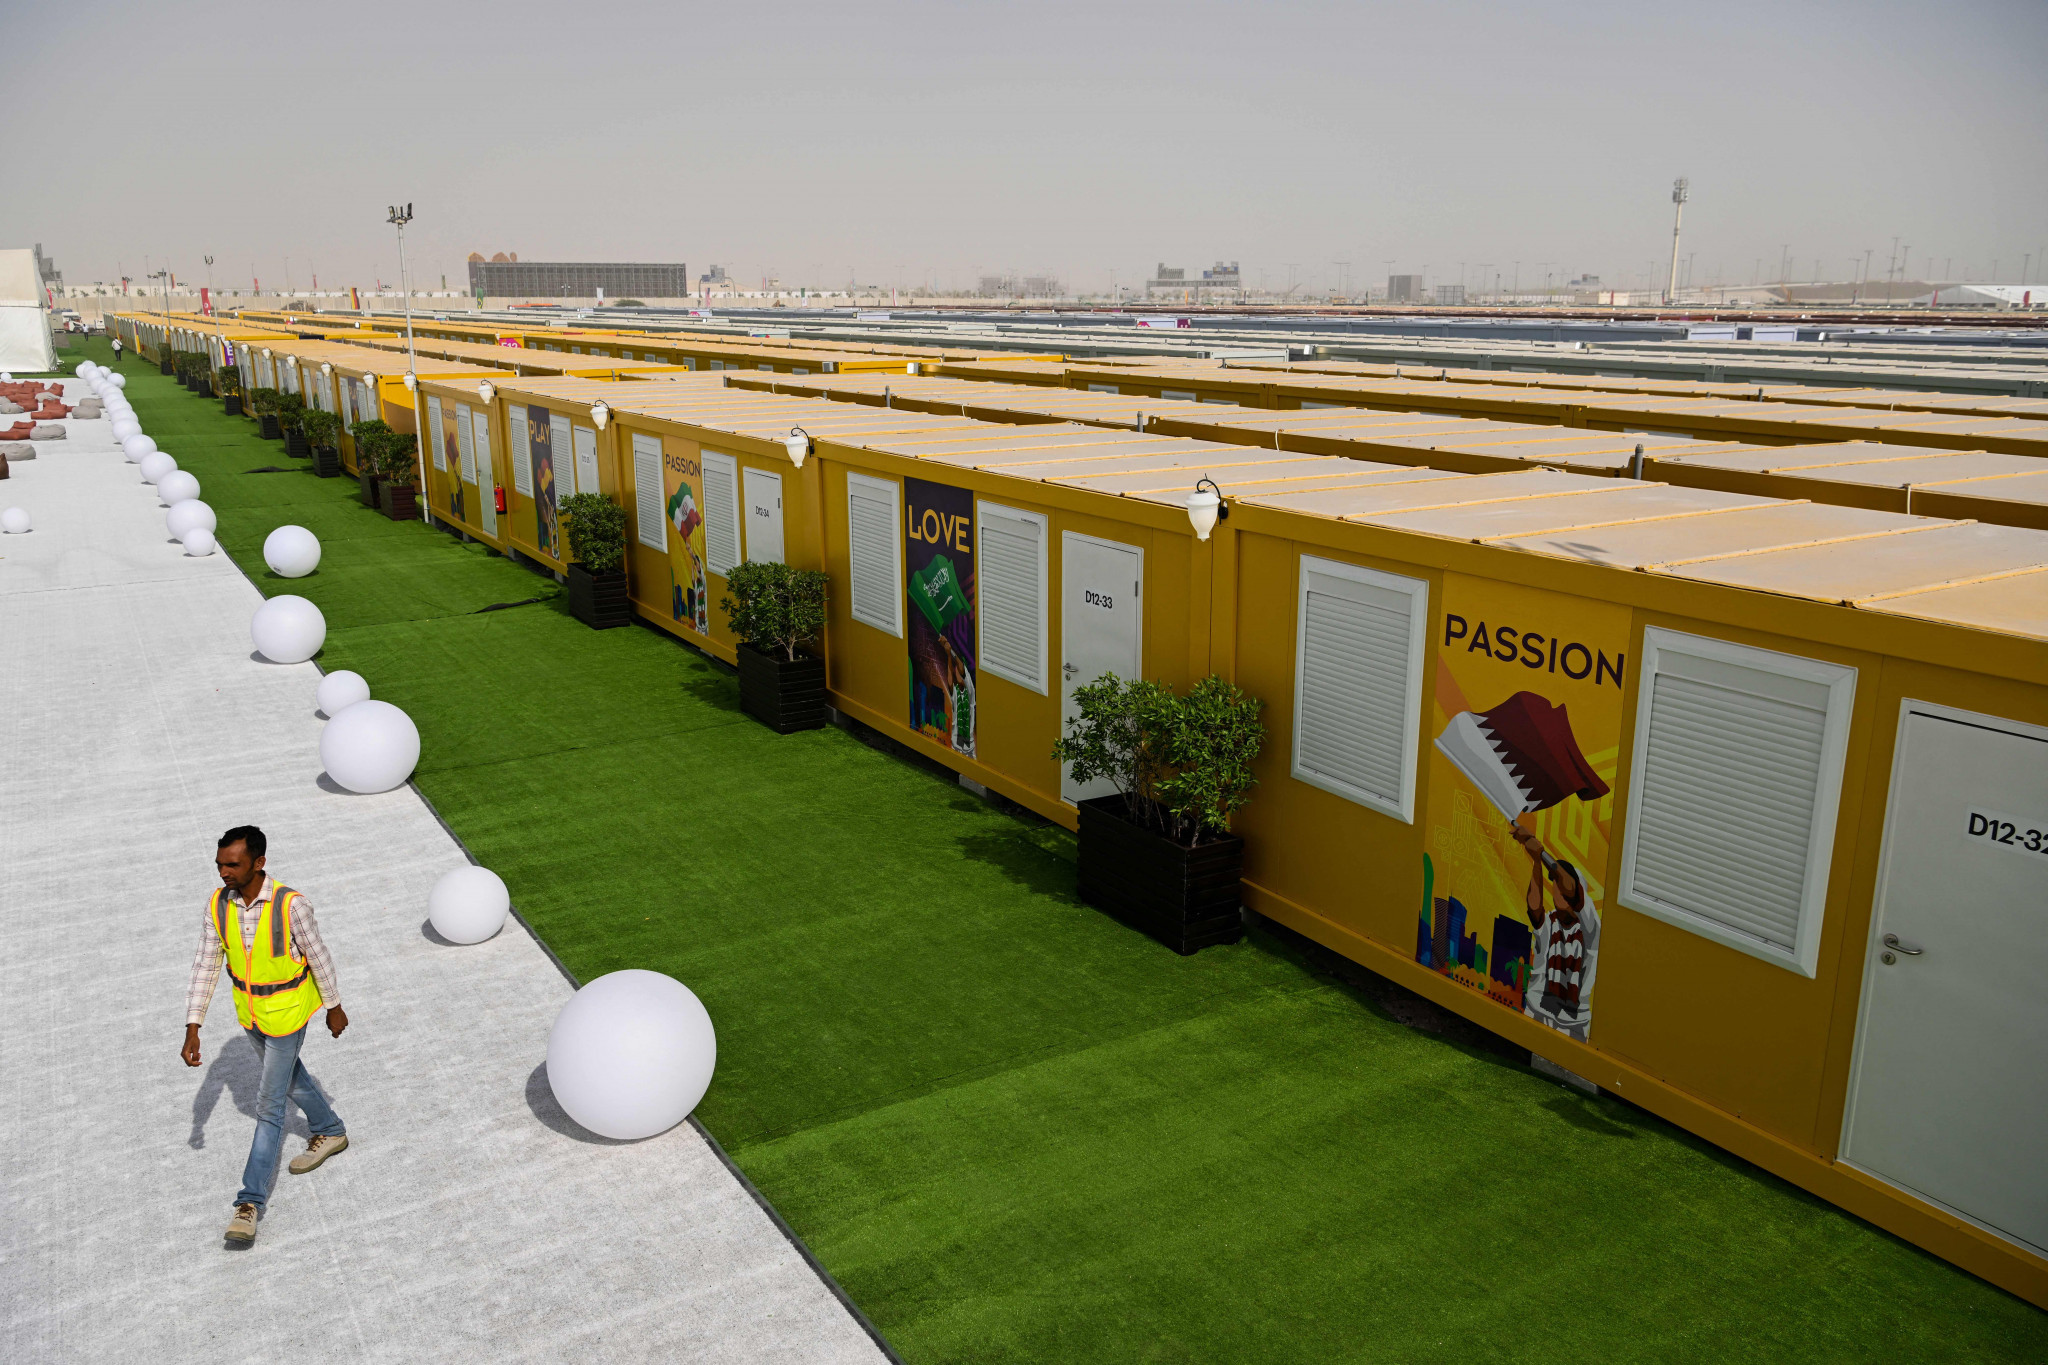 Qatar donates 10,000 mobile homes used at World Cup to Turkey and Syria